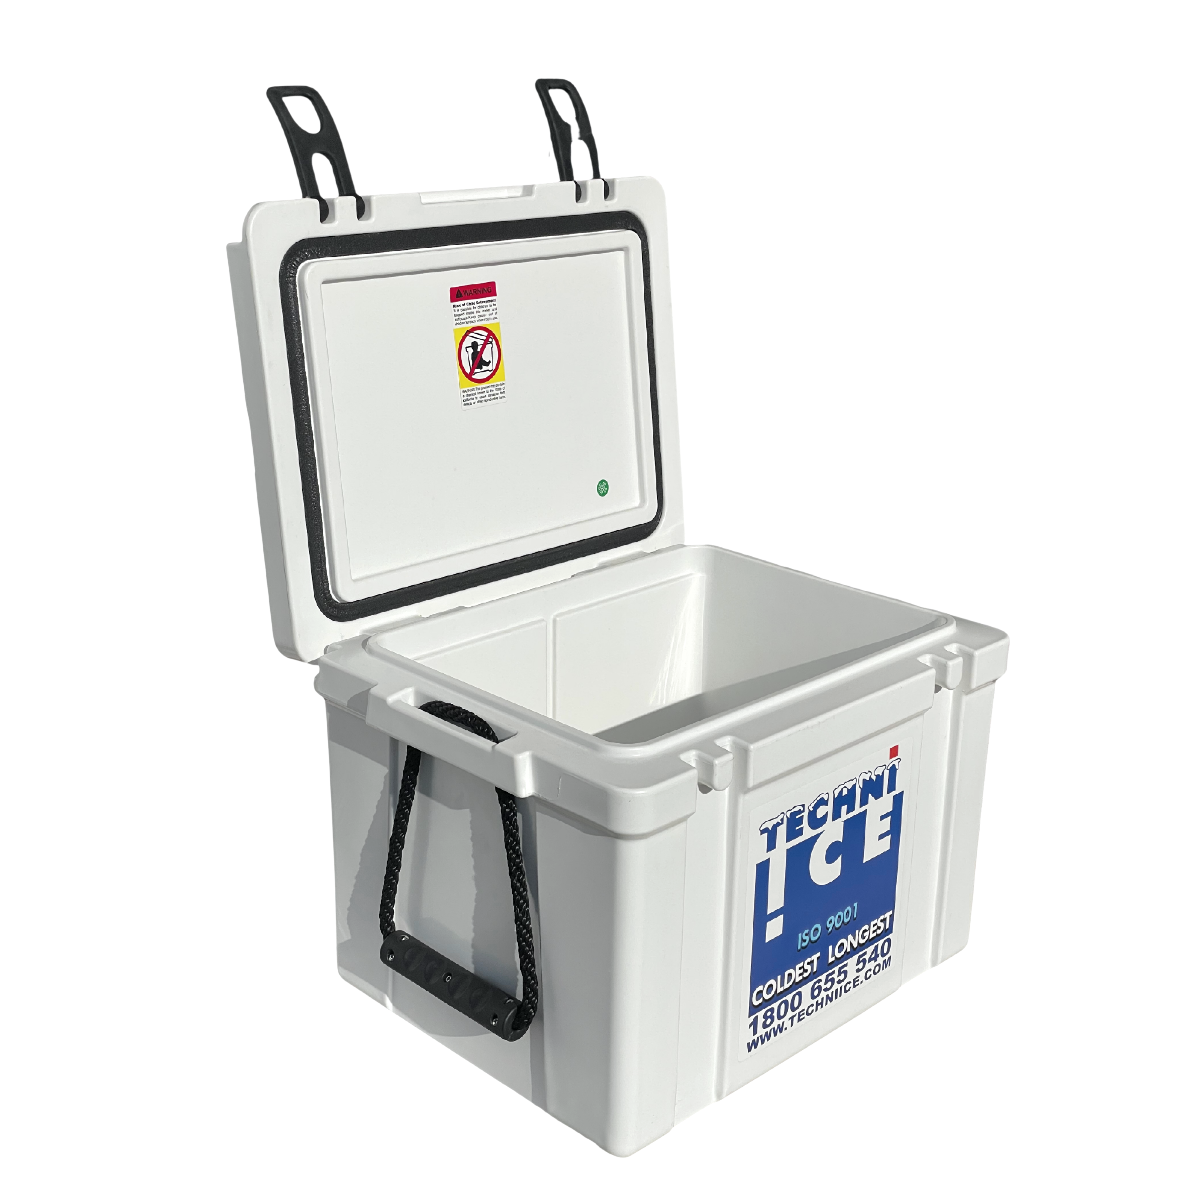 Techniice Classic Hybrid Ice box 25L White *PREORDER FOR JULY DISPATCH *FREE 6 REUSABLE DRY ICE PACKS VALUES $32.95